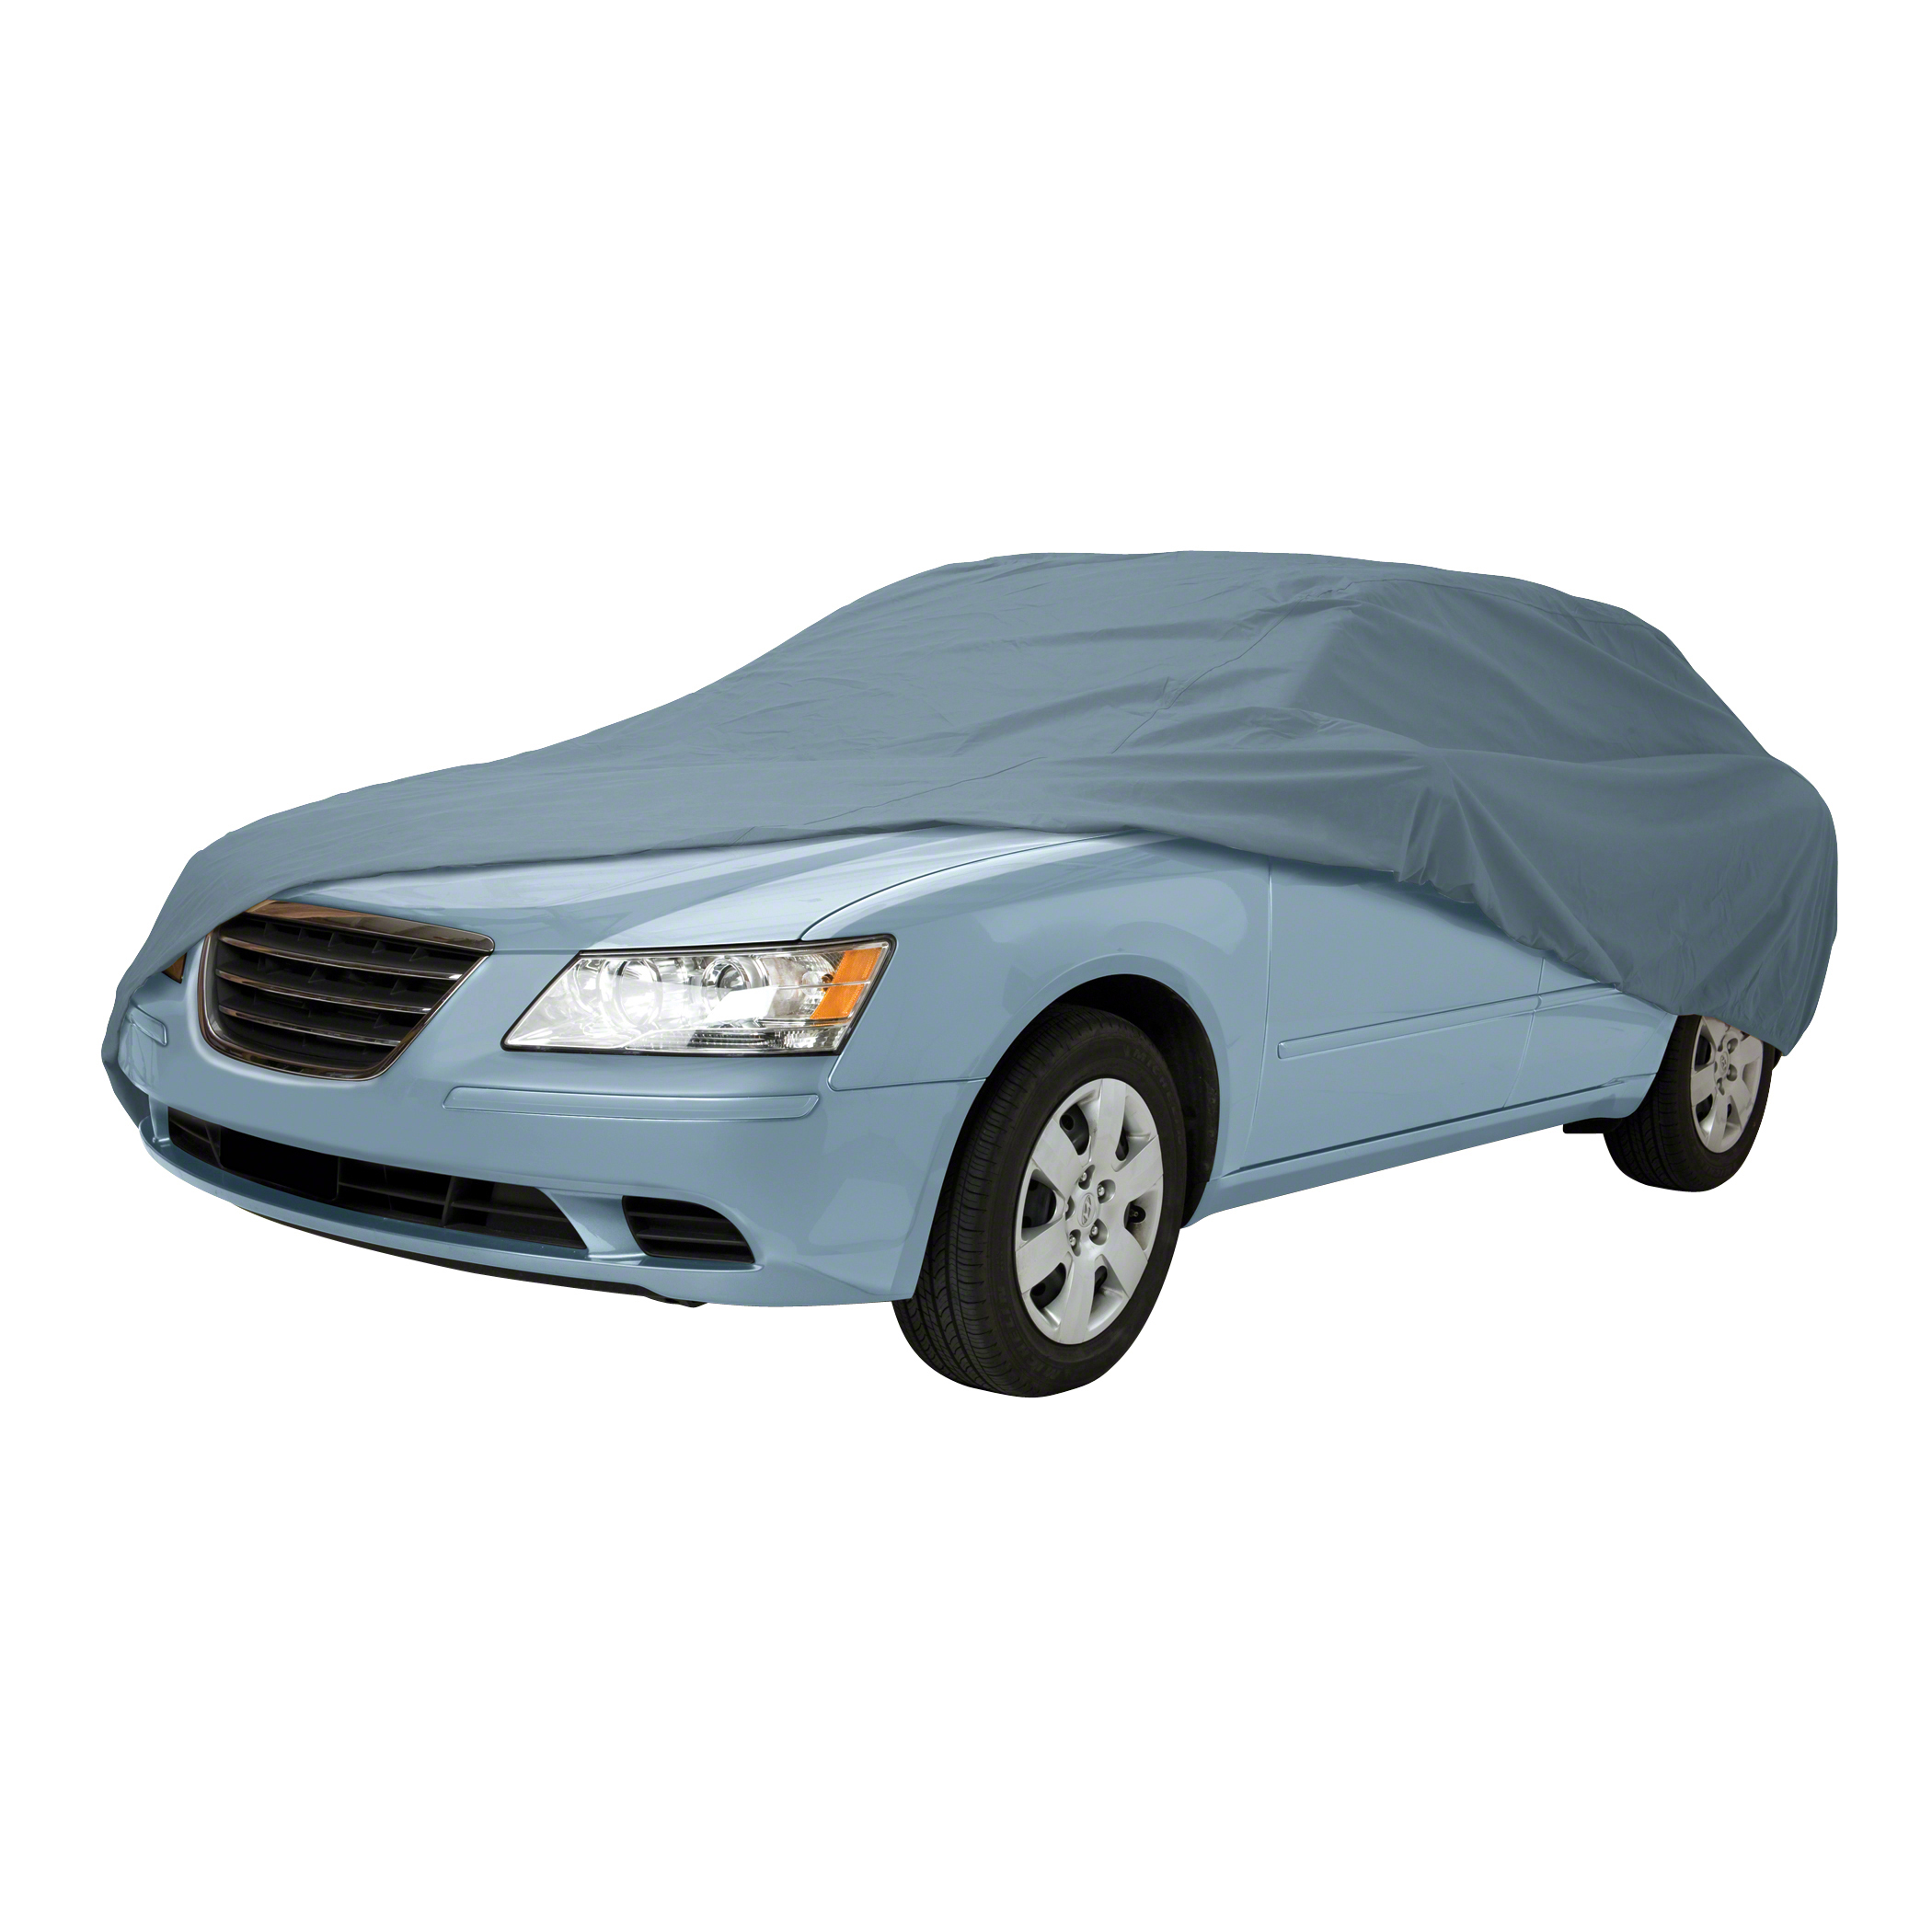 Classic Accessories OverDrive PolyPRO™ 1 Mid-Size Sedan Car Cover, 176" - 190"L, Biodiesel - image 1 of 8